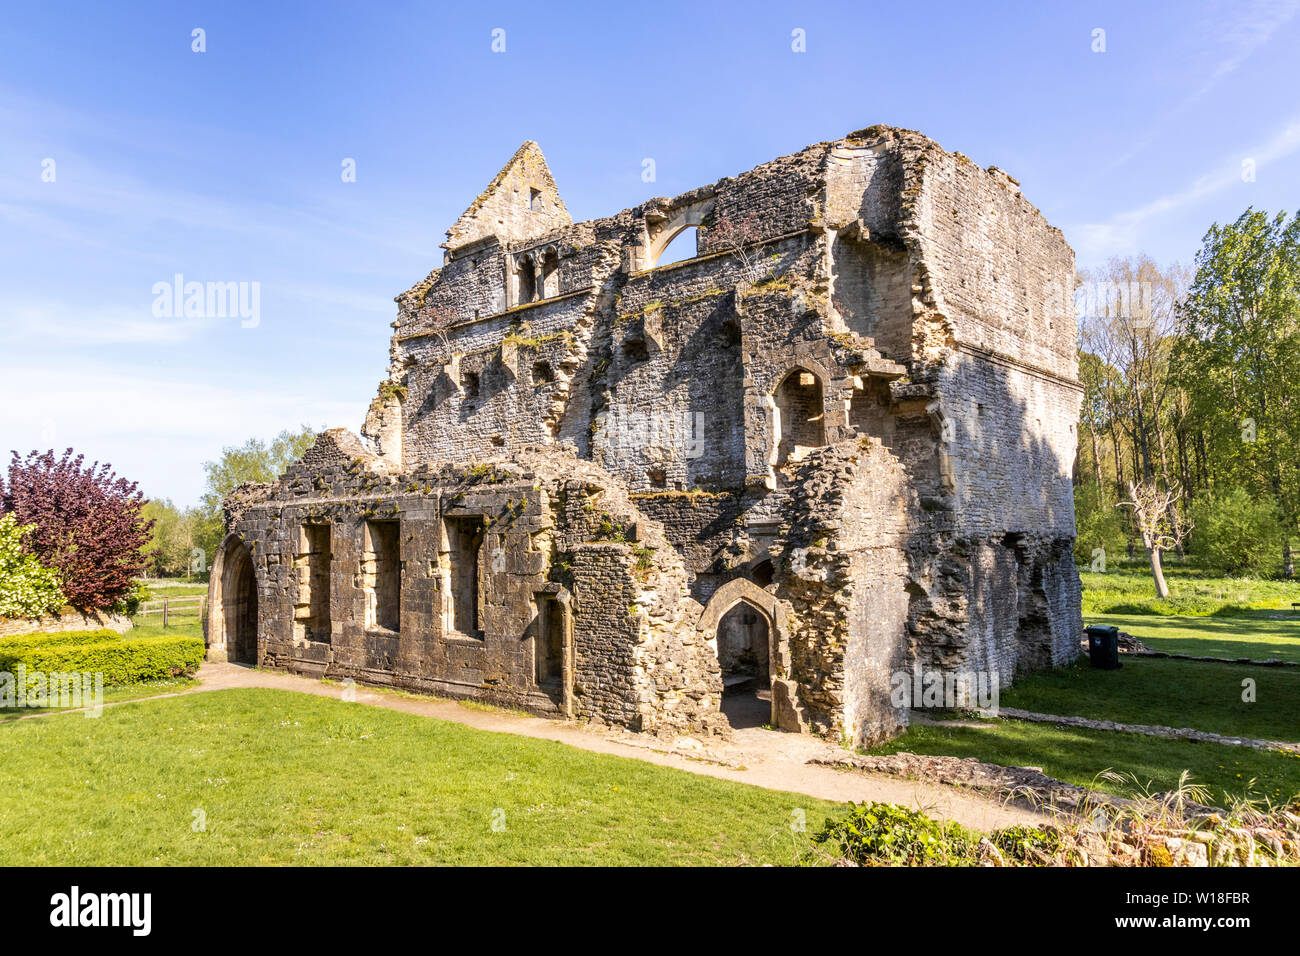 Evening light on the ruins of Minster Lovell Hall, a 15th century manor house beside the River Windrush, Minster Lovell, Oxfordshire UK Stock Photo